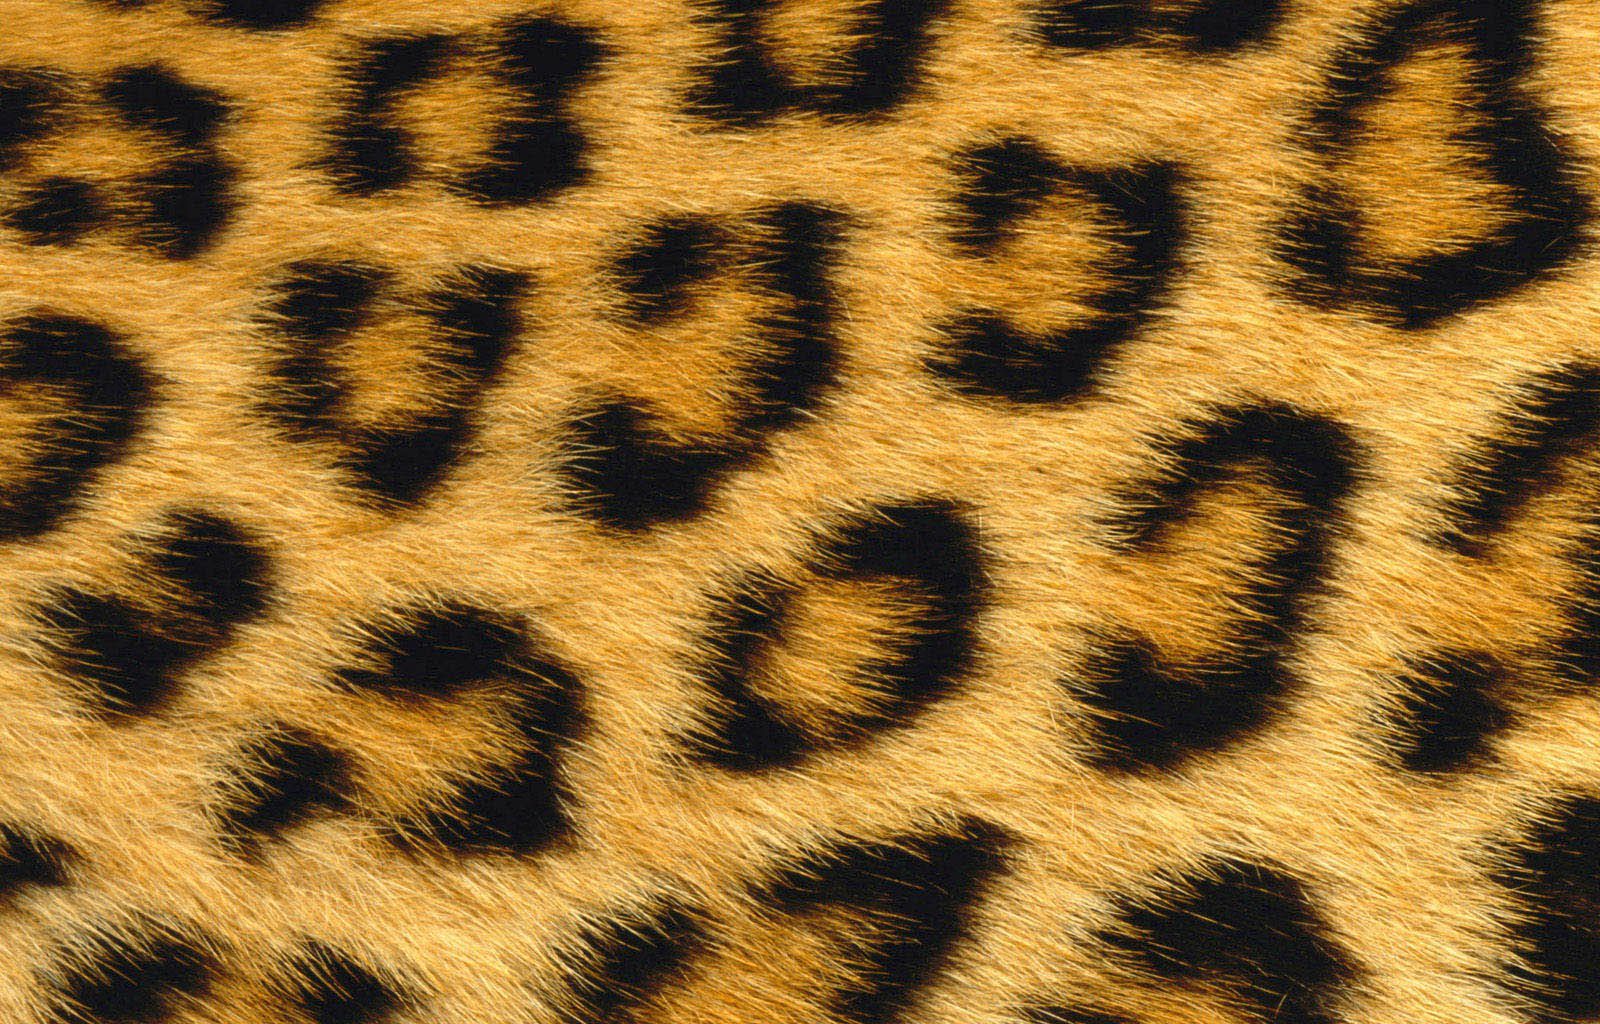 Download Abstract Cool Desktop Pictures Leopard Wallpaper | Full ...